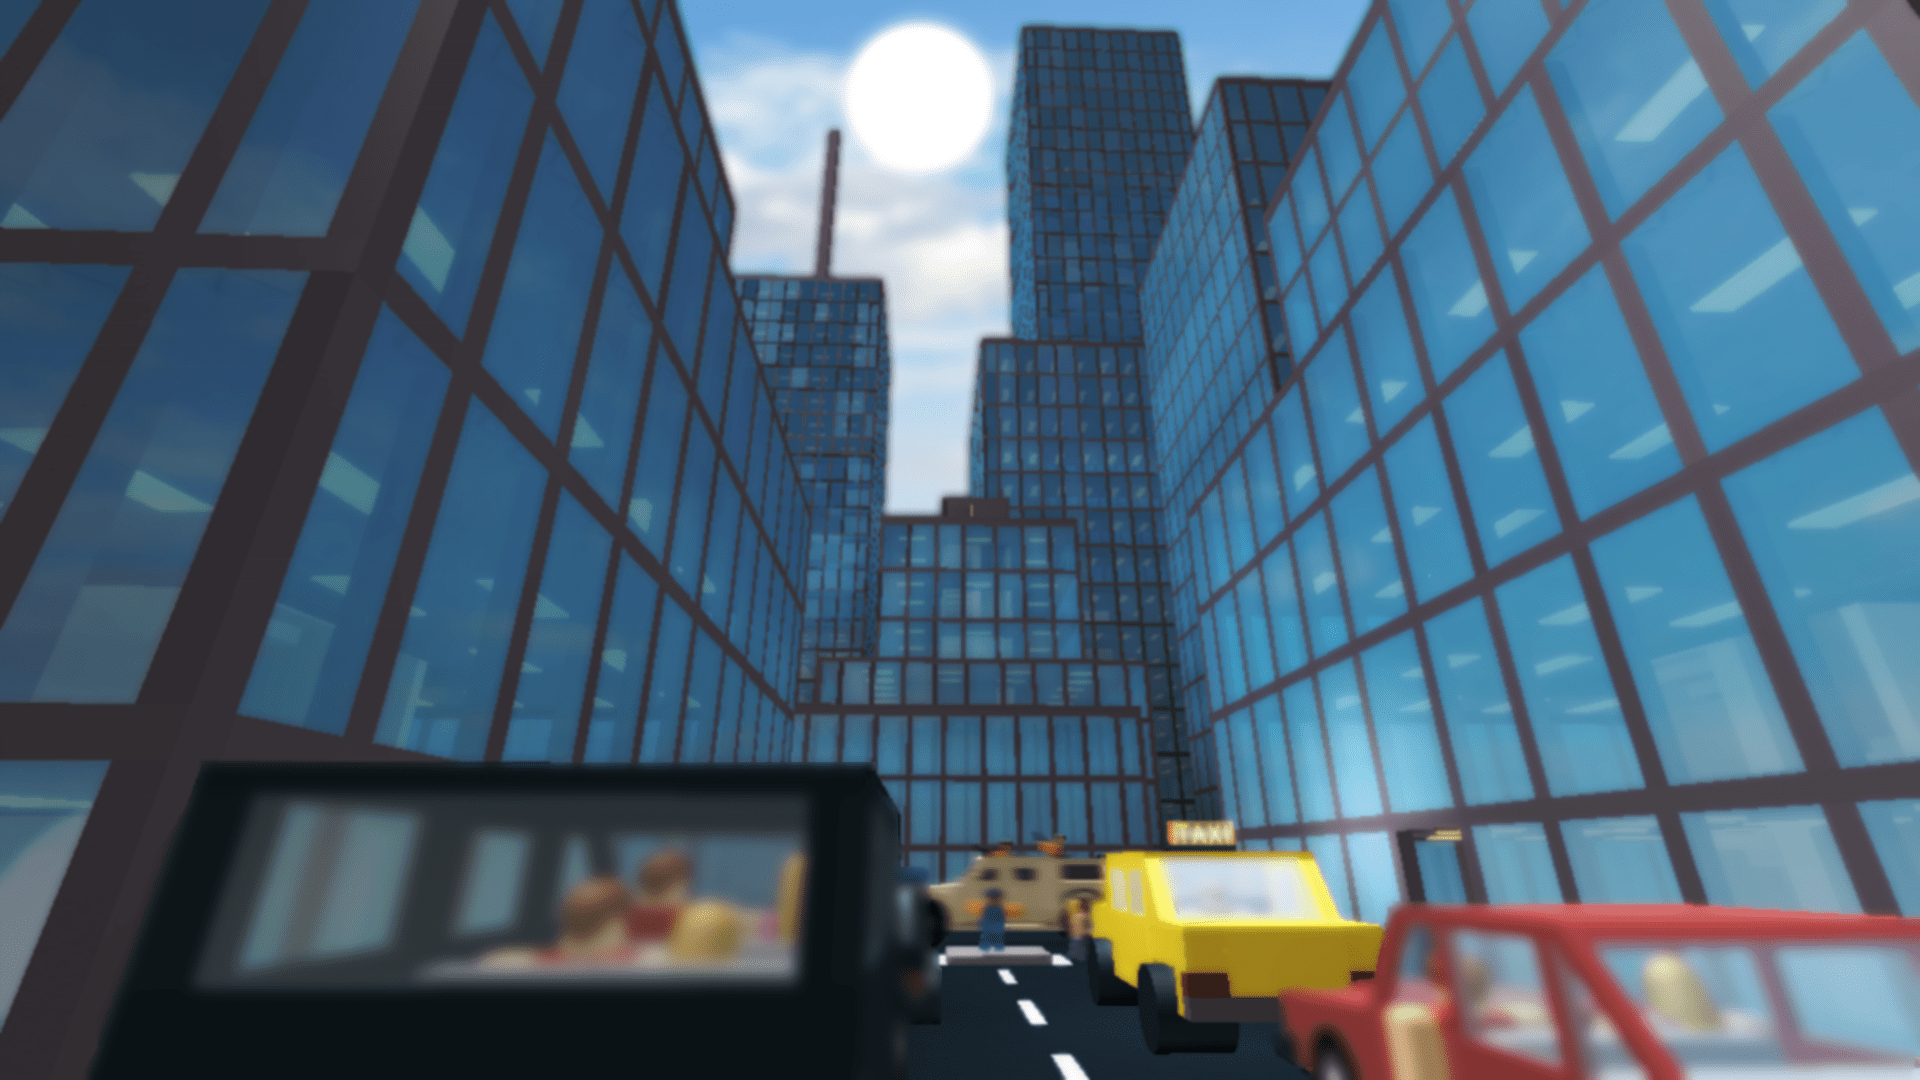 Roblox City Wallpapers Top Free Roblox City Backgrounds Wallpaperaccess - roblox city background